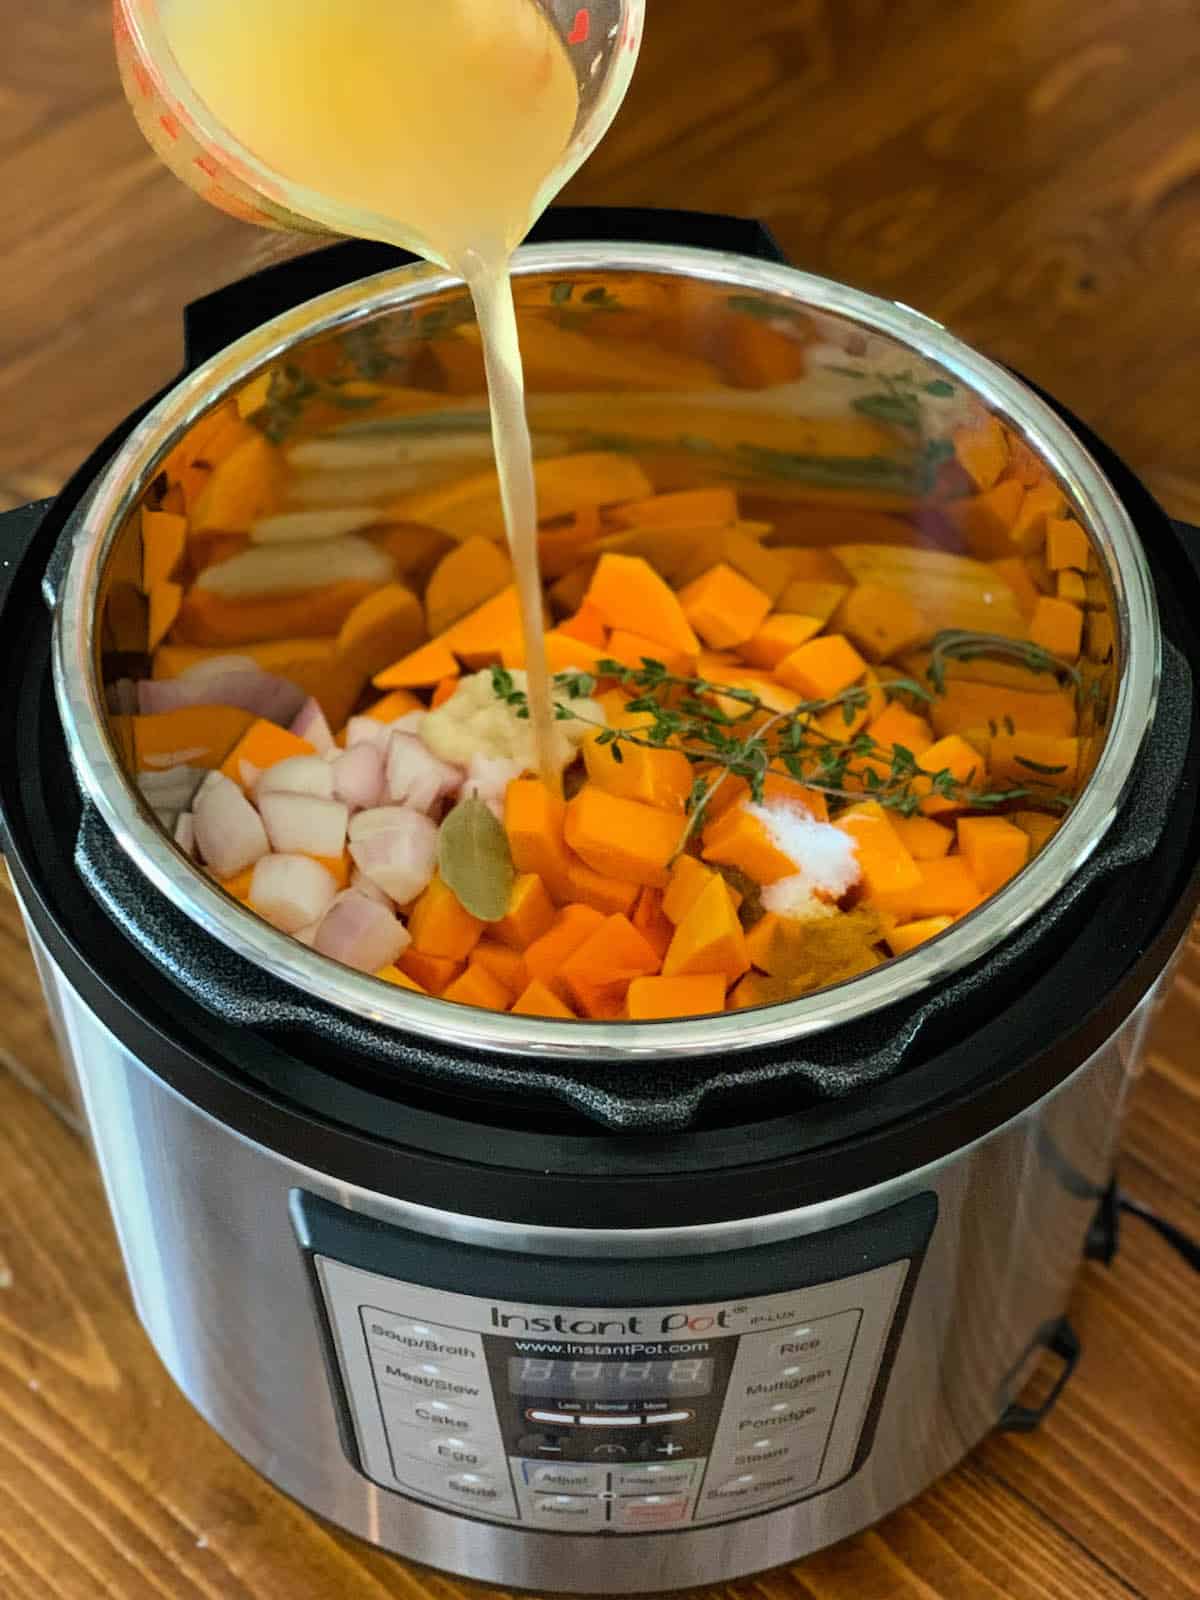 This simple Instant Pot Butternut Squash Soup cooks in just 6 minutes! Finishing with goat cheese adds a special touch that makes this a restaurant-quality dish you can easily make at home. | foxeslovelemons.com